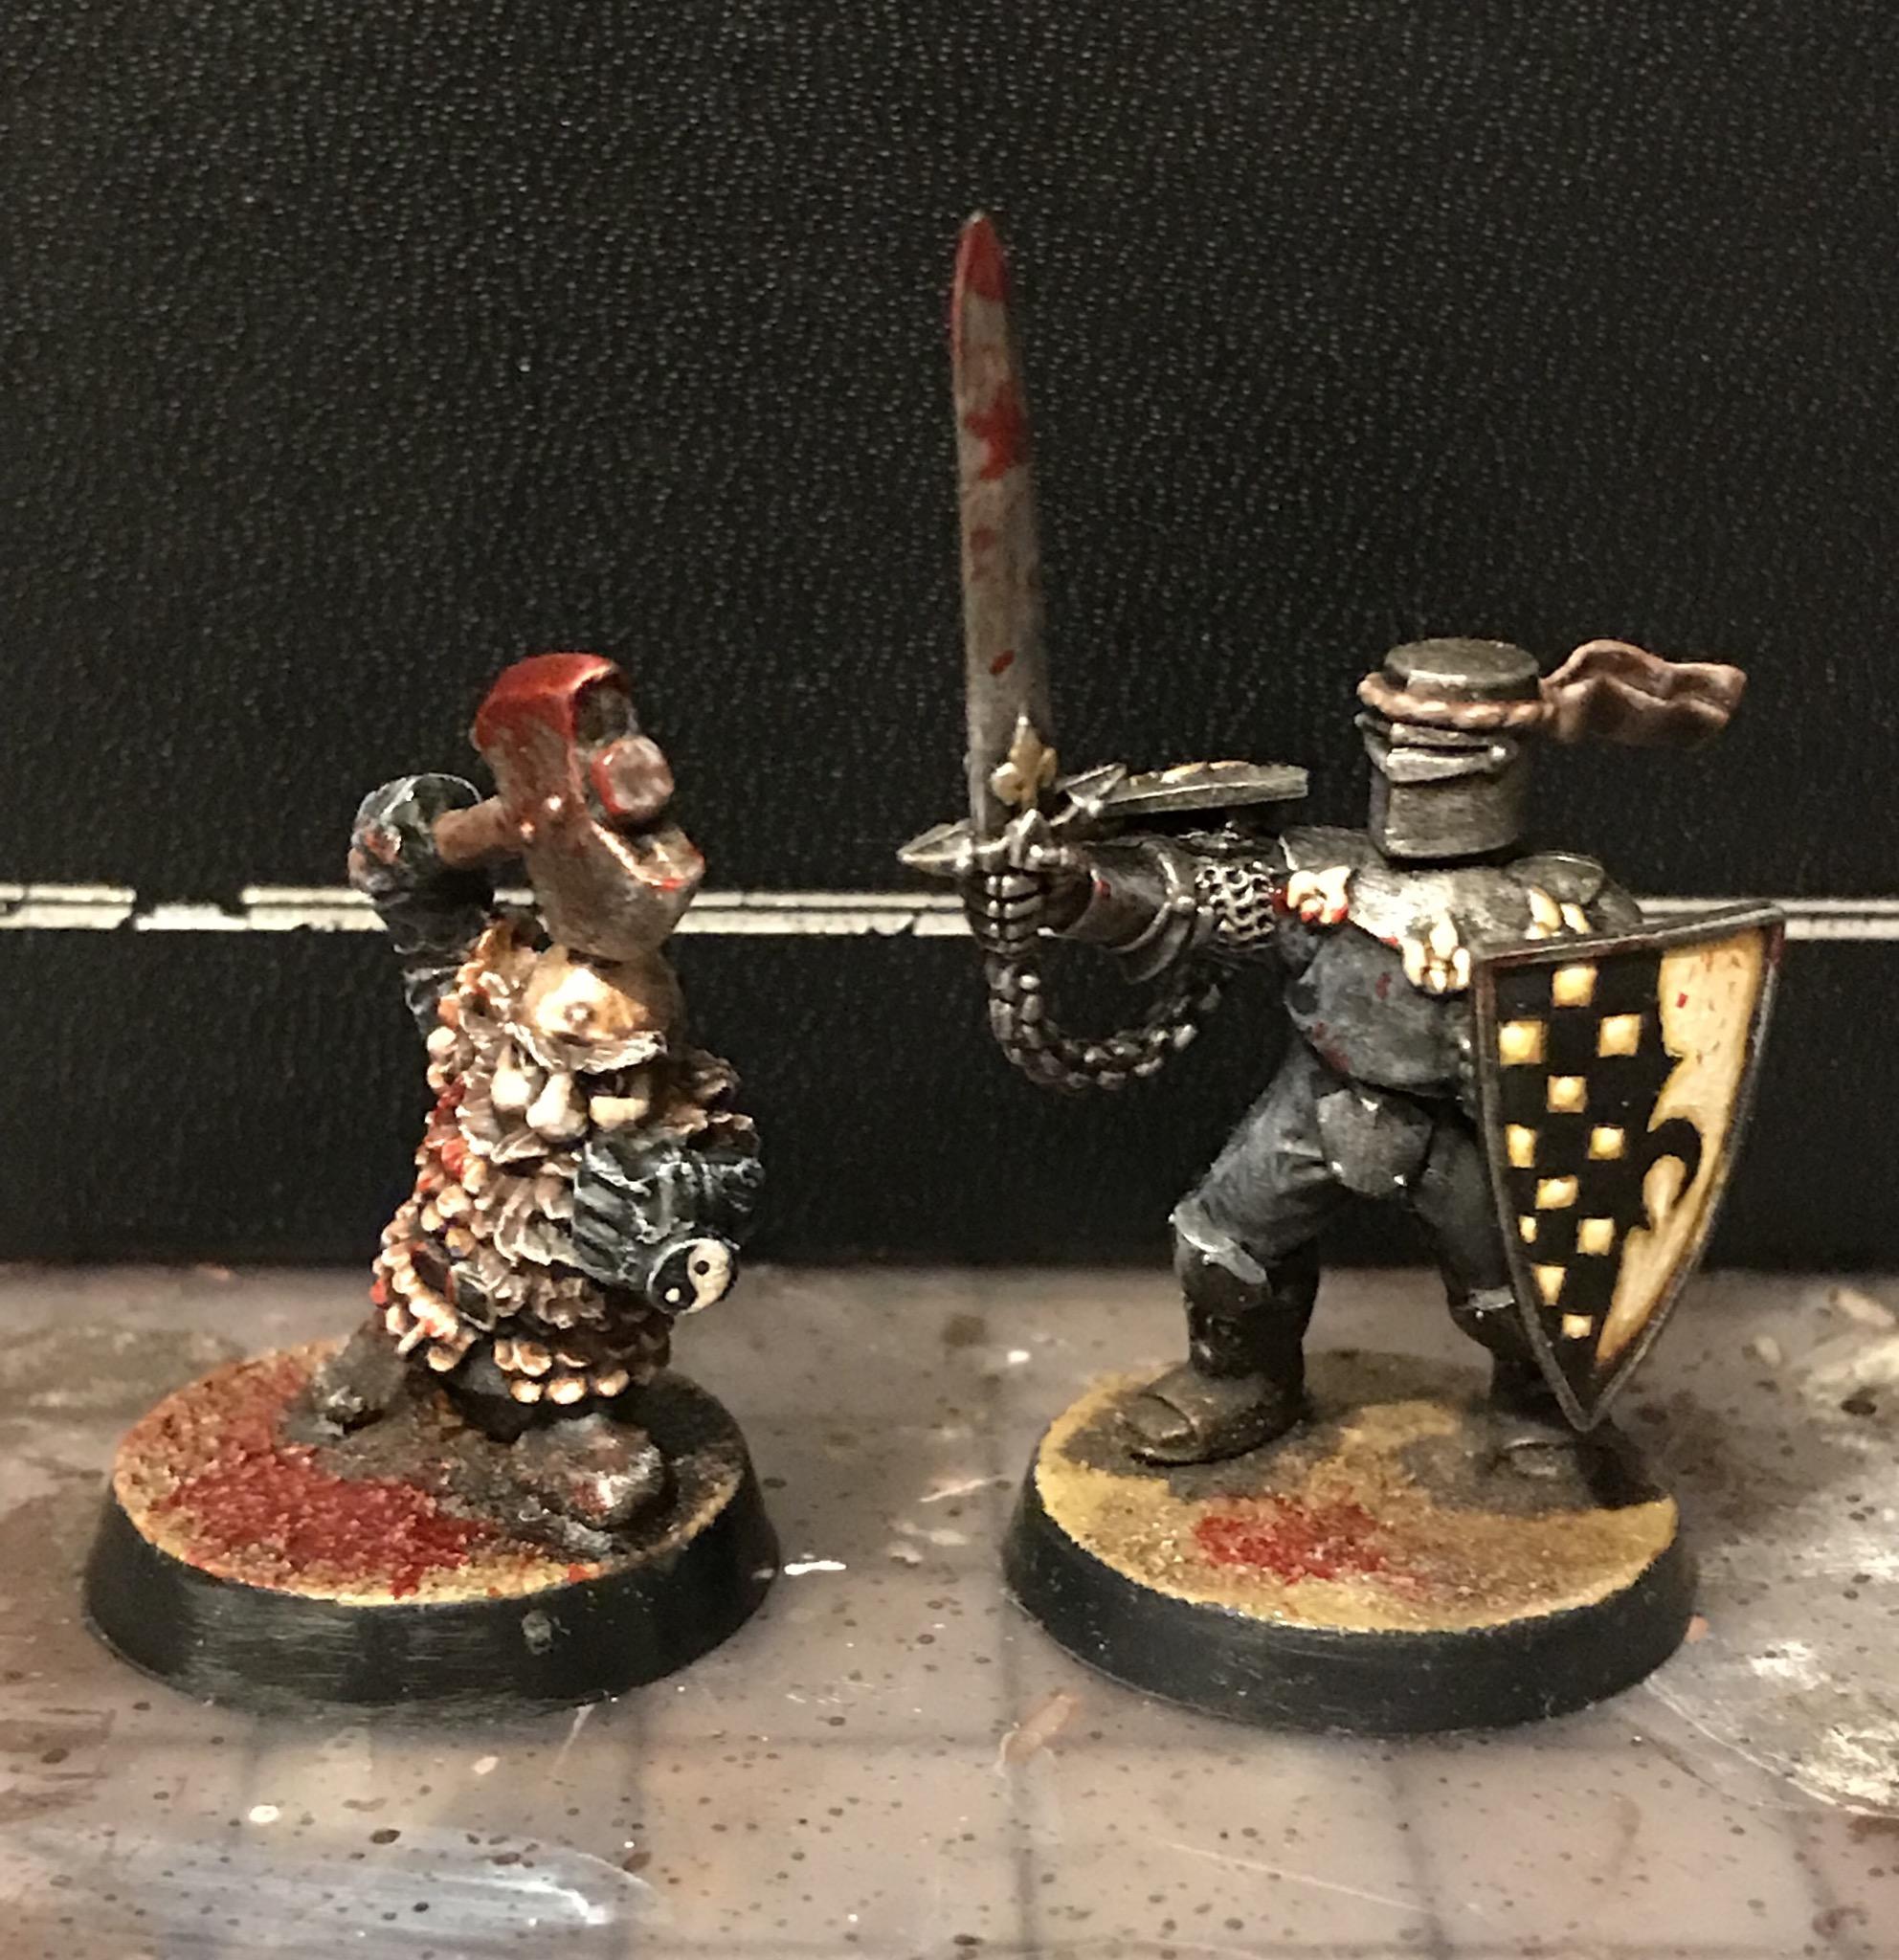 Battle, Brettonnian, Character, Characters, Dwarves, Elves, Game, Gamers, Knights, Mini, Miniatures, Modes, Player, Roleplay, Warhammer Fantasy, Wood